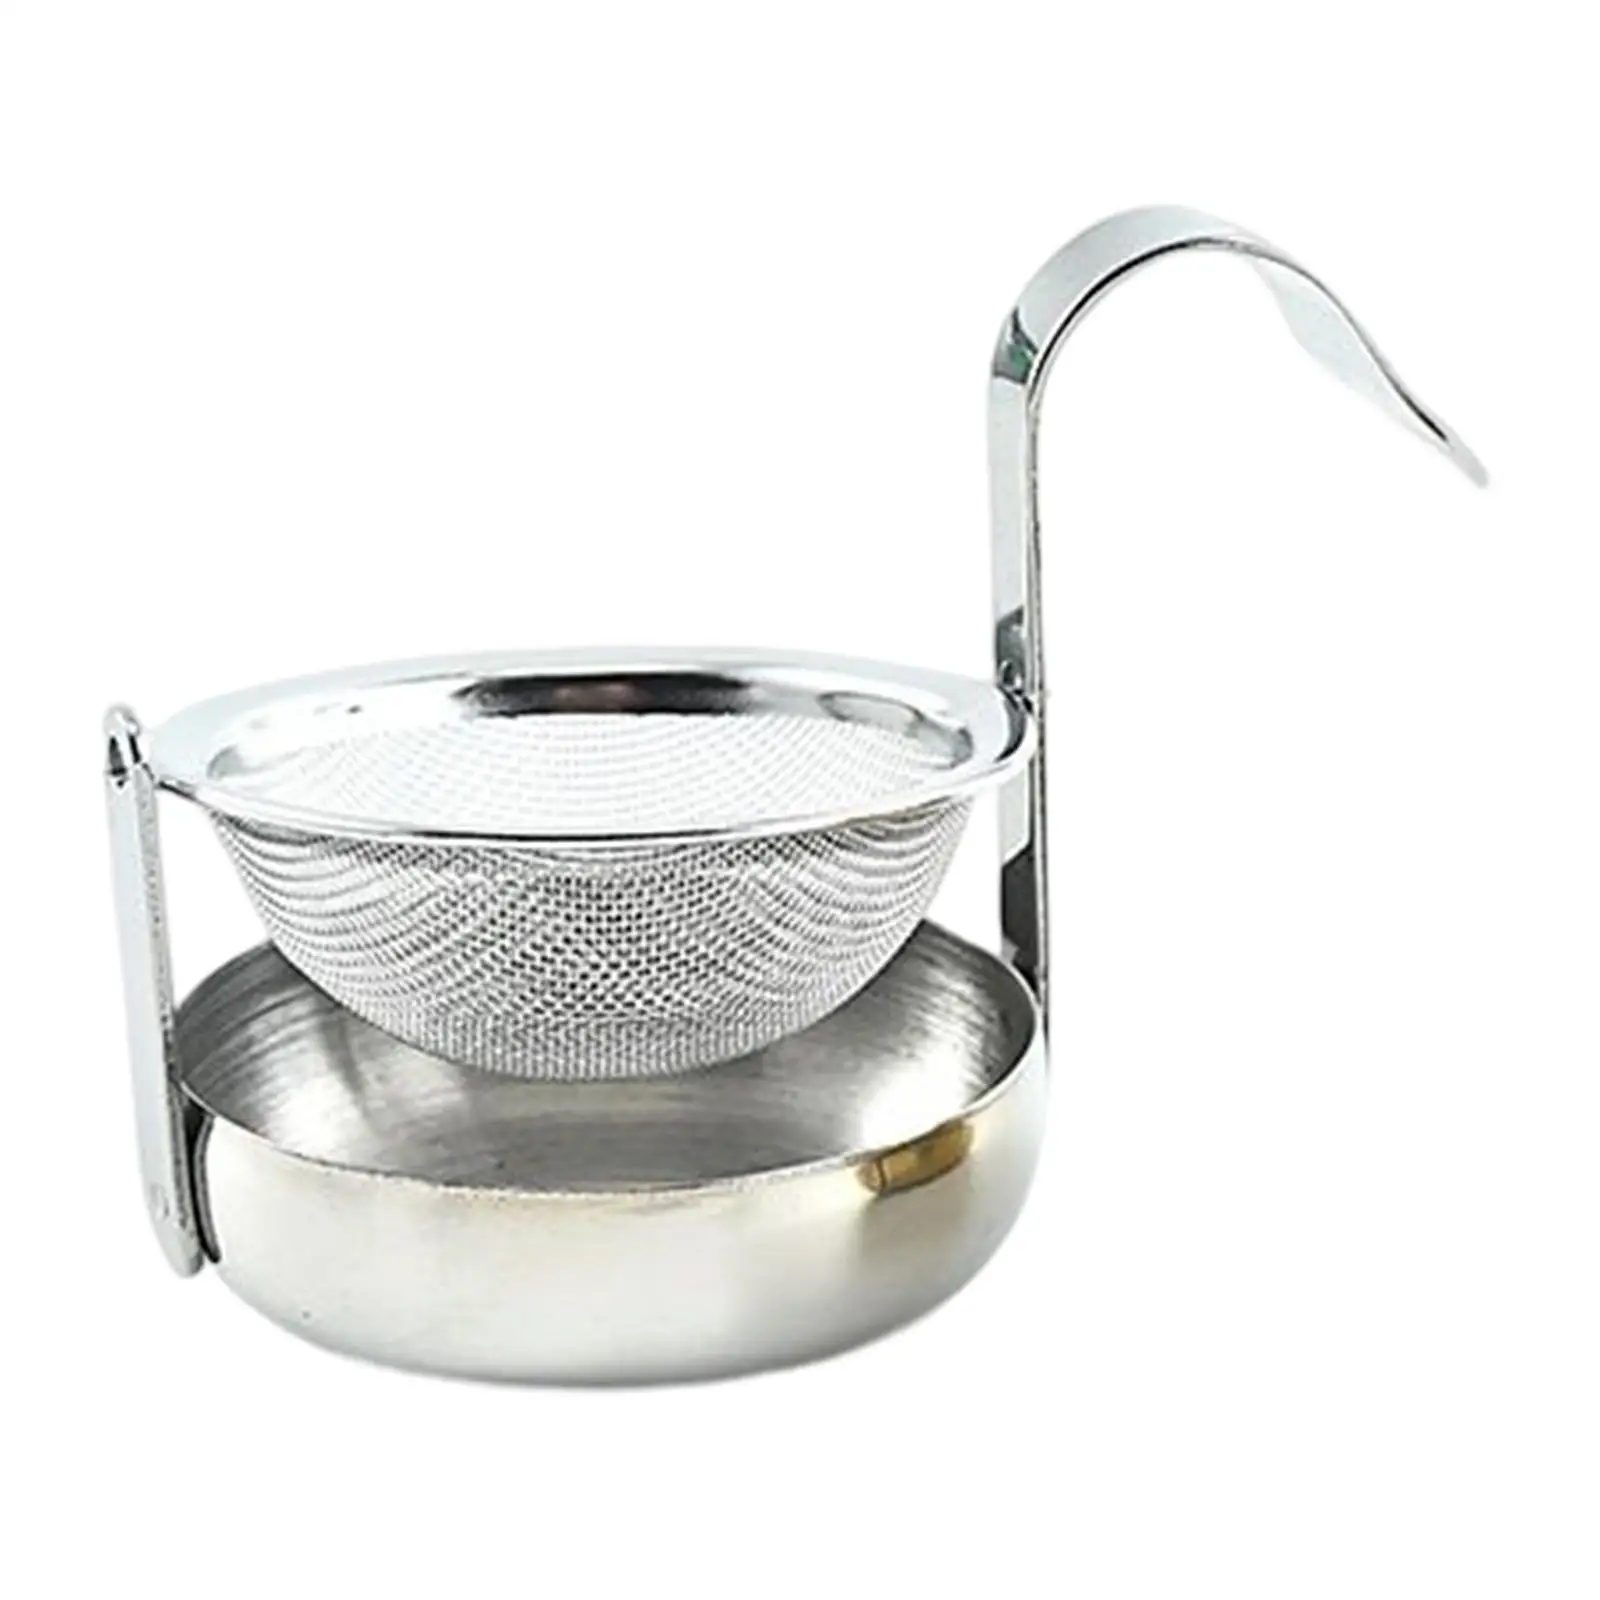 360 Rotatable Tea Strainer 304 Stainless Steel Reusable Fine Mesh Tea Accessories Tea Filter for Party Cafe Home Bar Kitchen